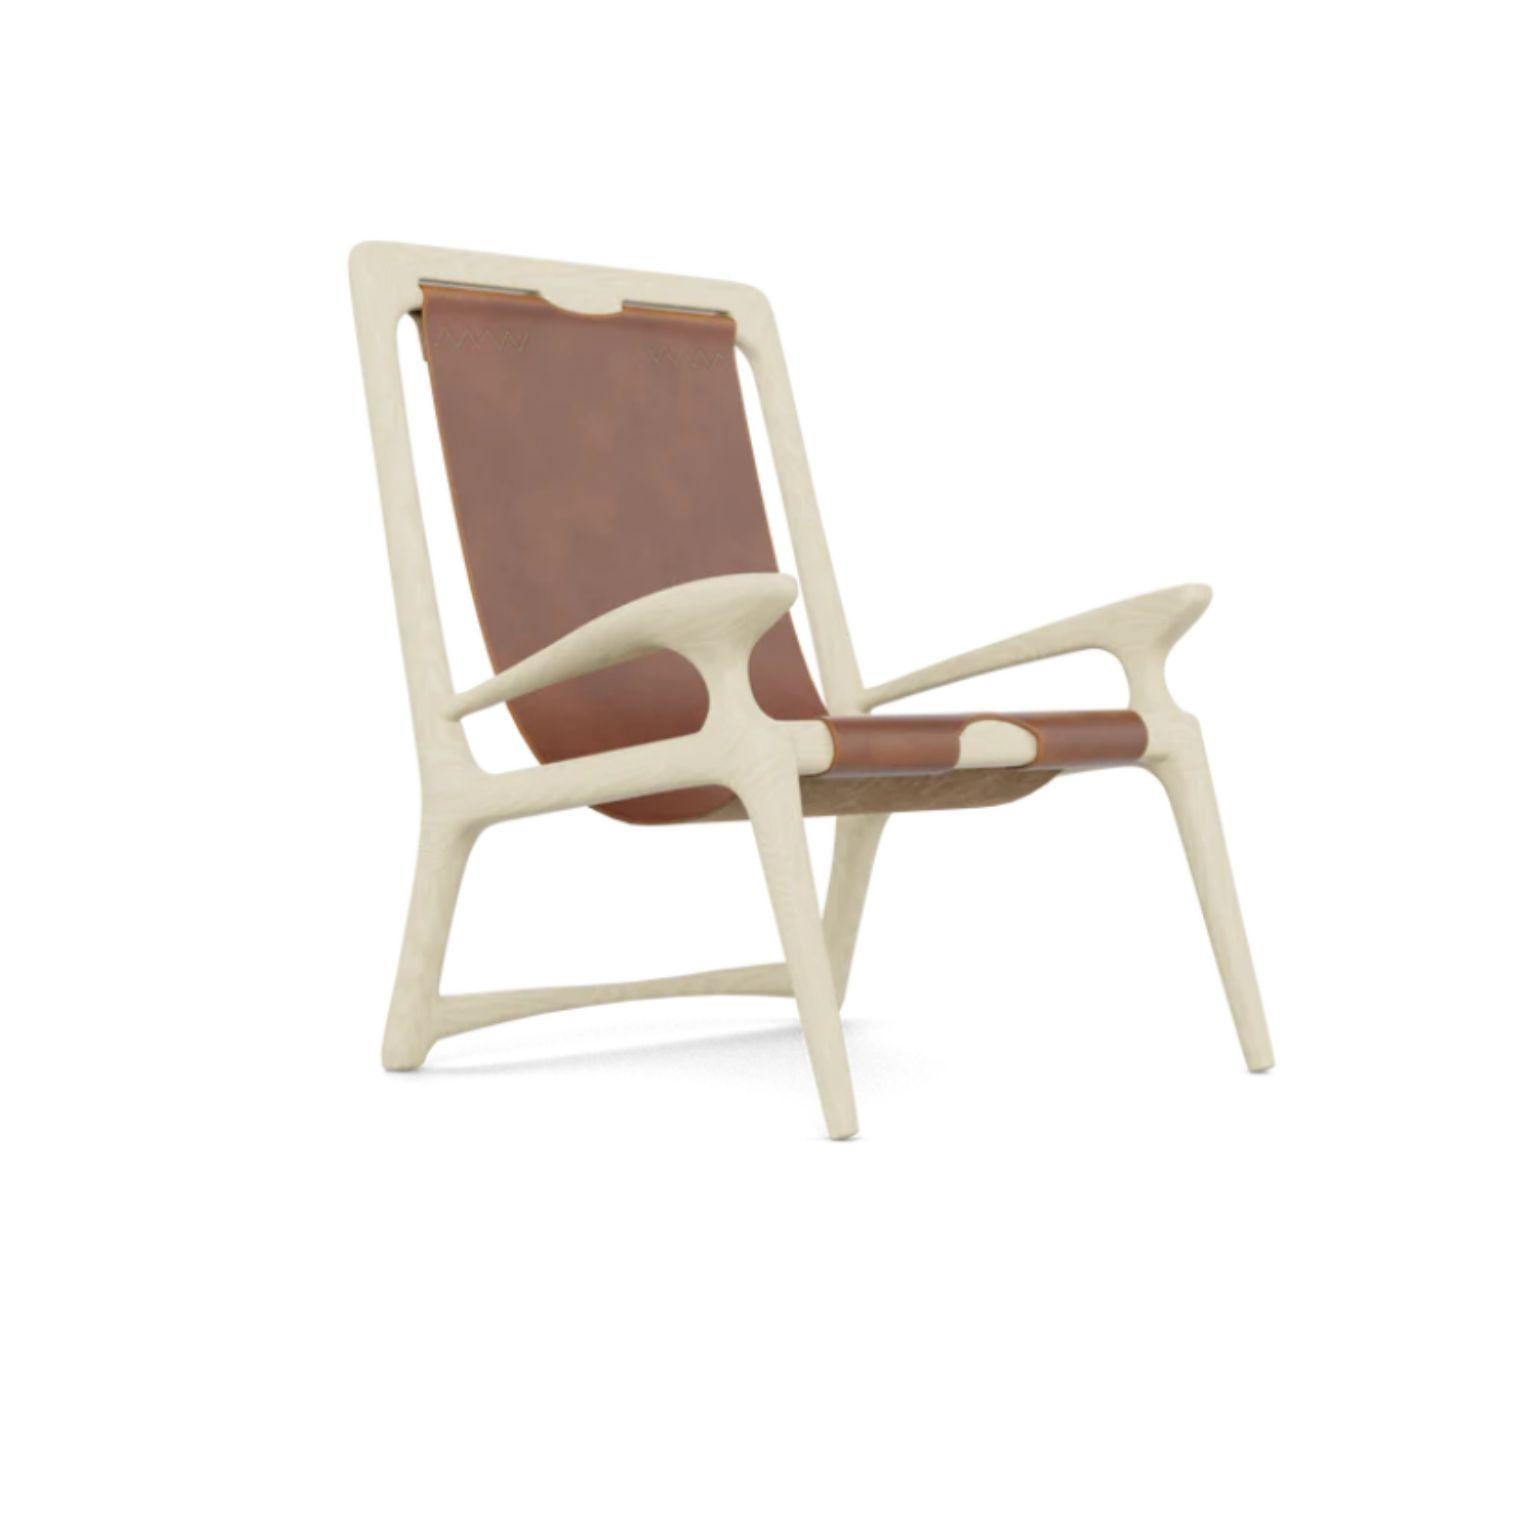 White ash & leather sling chair mod 2 by Fernweh Woodworking
Dimensions: 
W 27